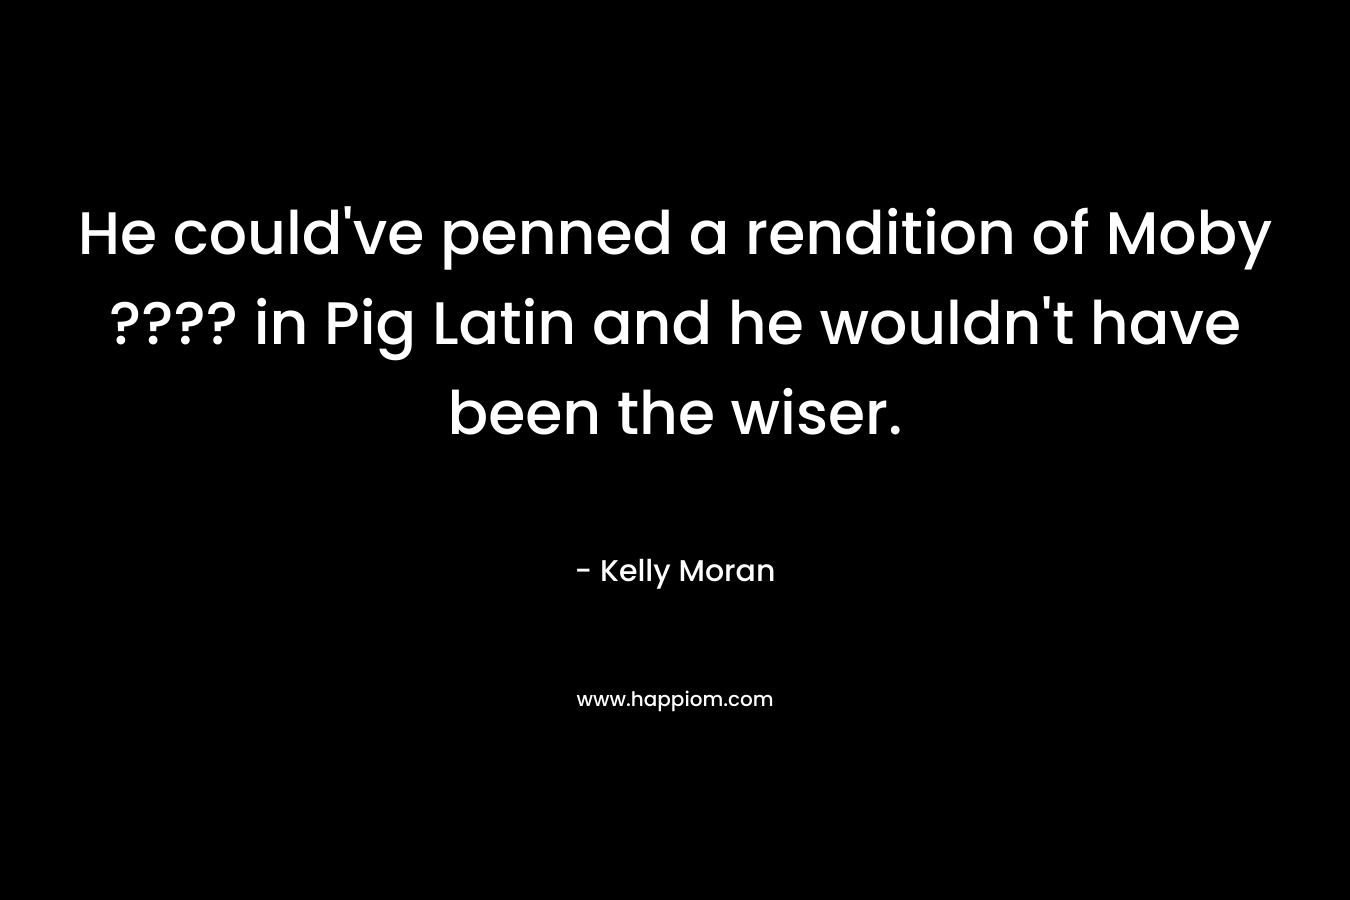 He could've penned a rendition of Moby ???? in Pig Latin and he wouldn't have been the wiser.